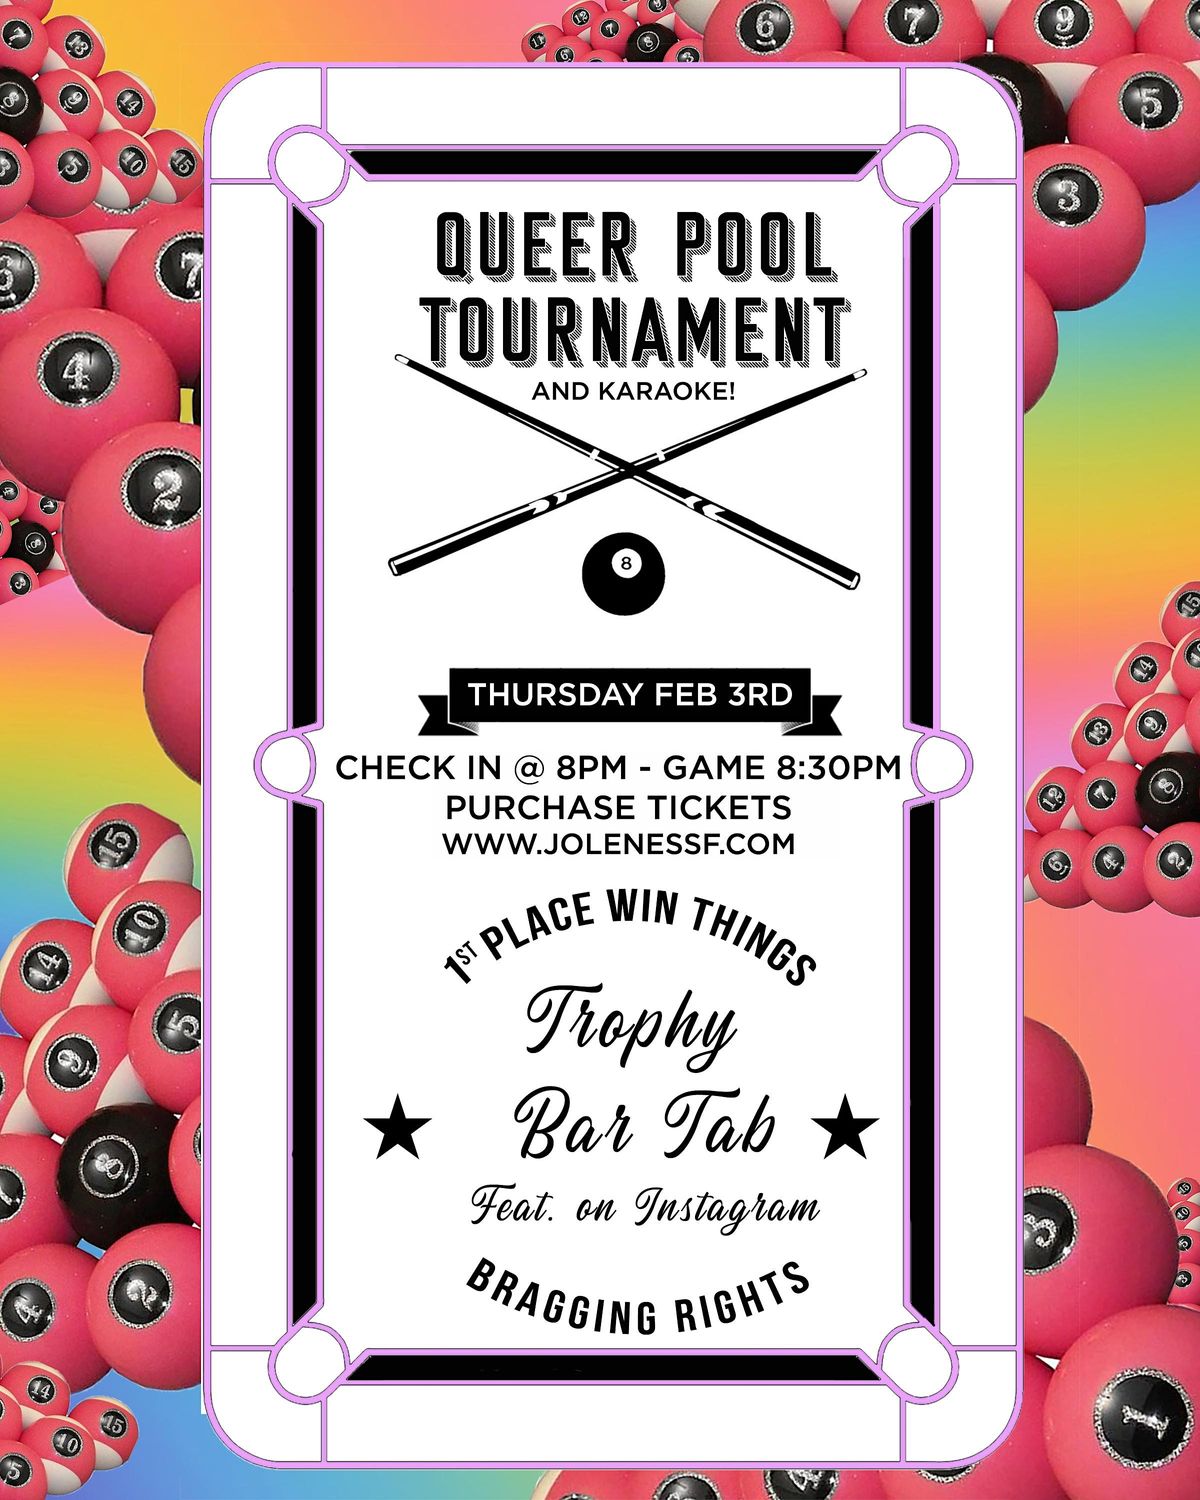 QUEER POOL TOURNAMENT AT JOLENE'S THURSDAY MAY 11TH @ 8PM